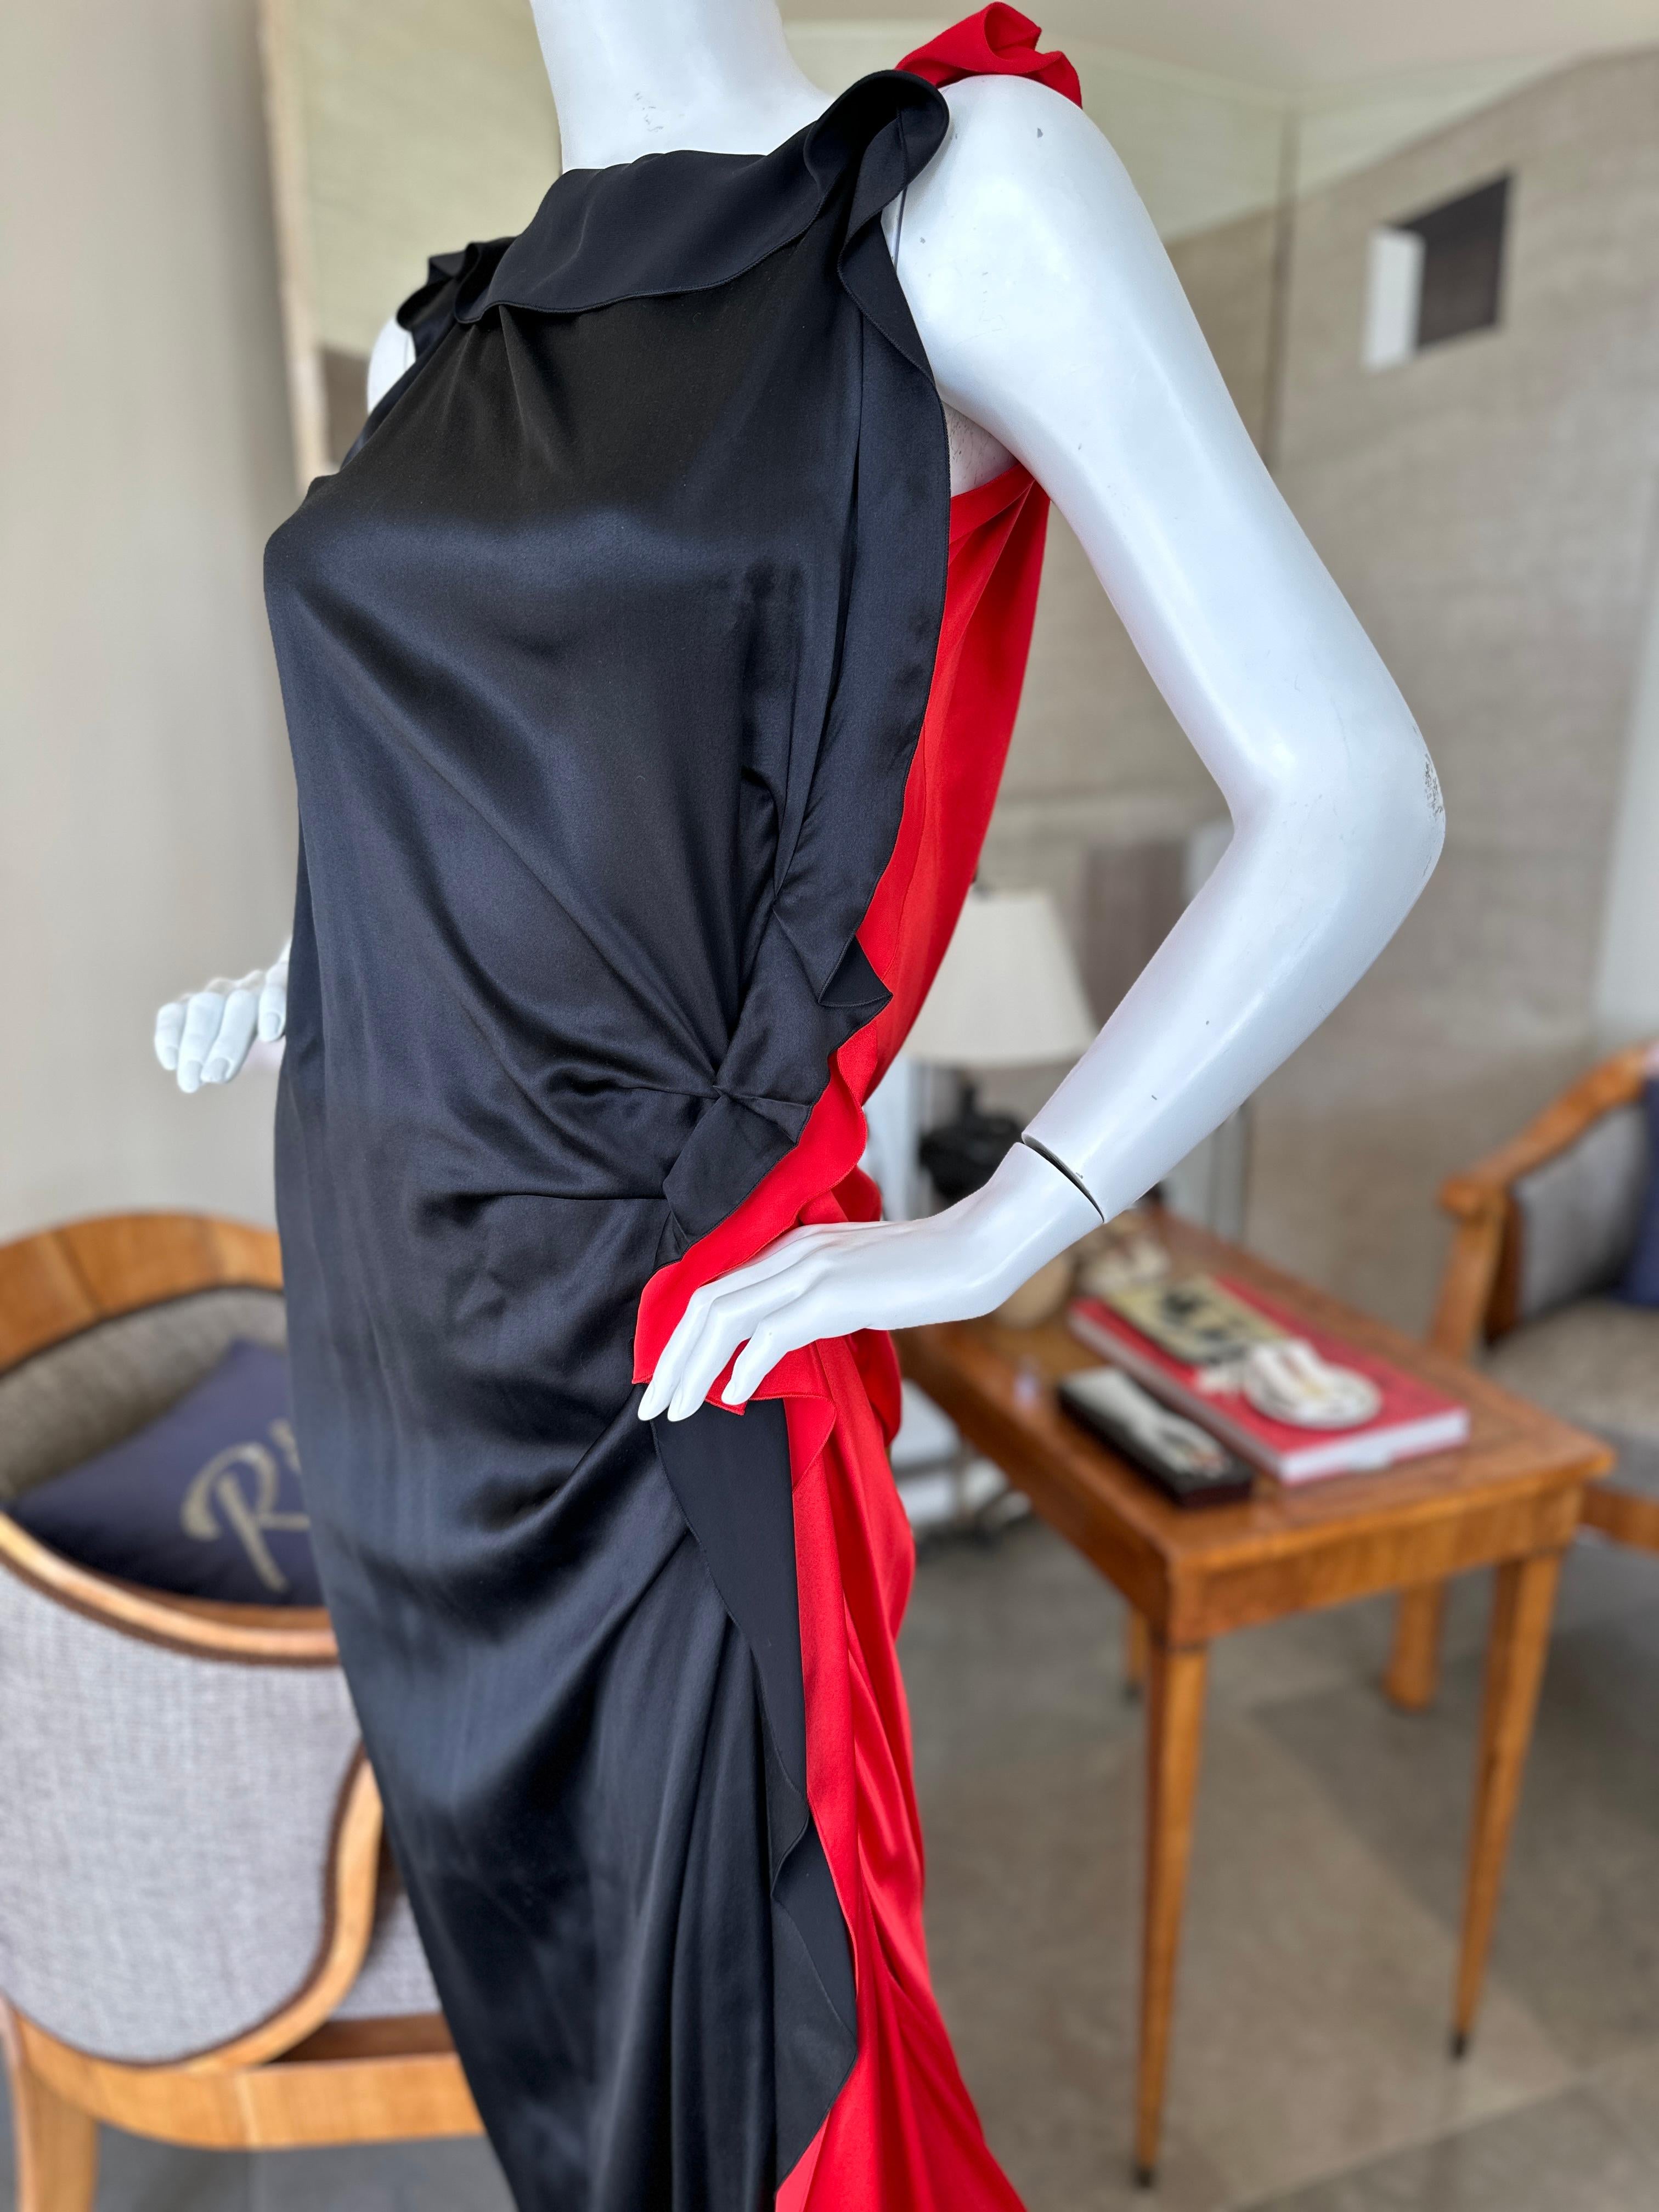 Lanvin by Alber Elbaz Silk Colorblock Evening Dress from Spring 2013 For Sale 3